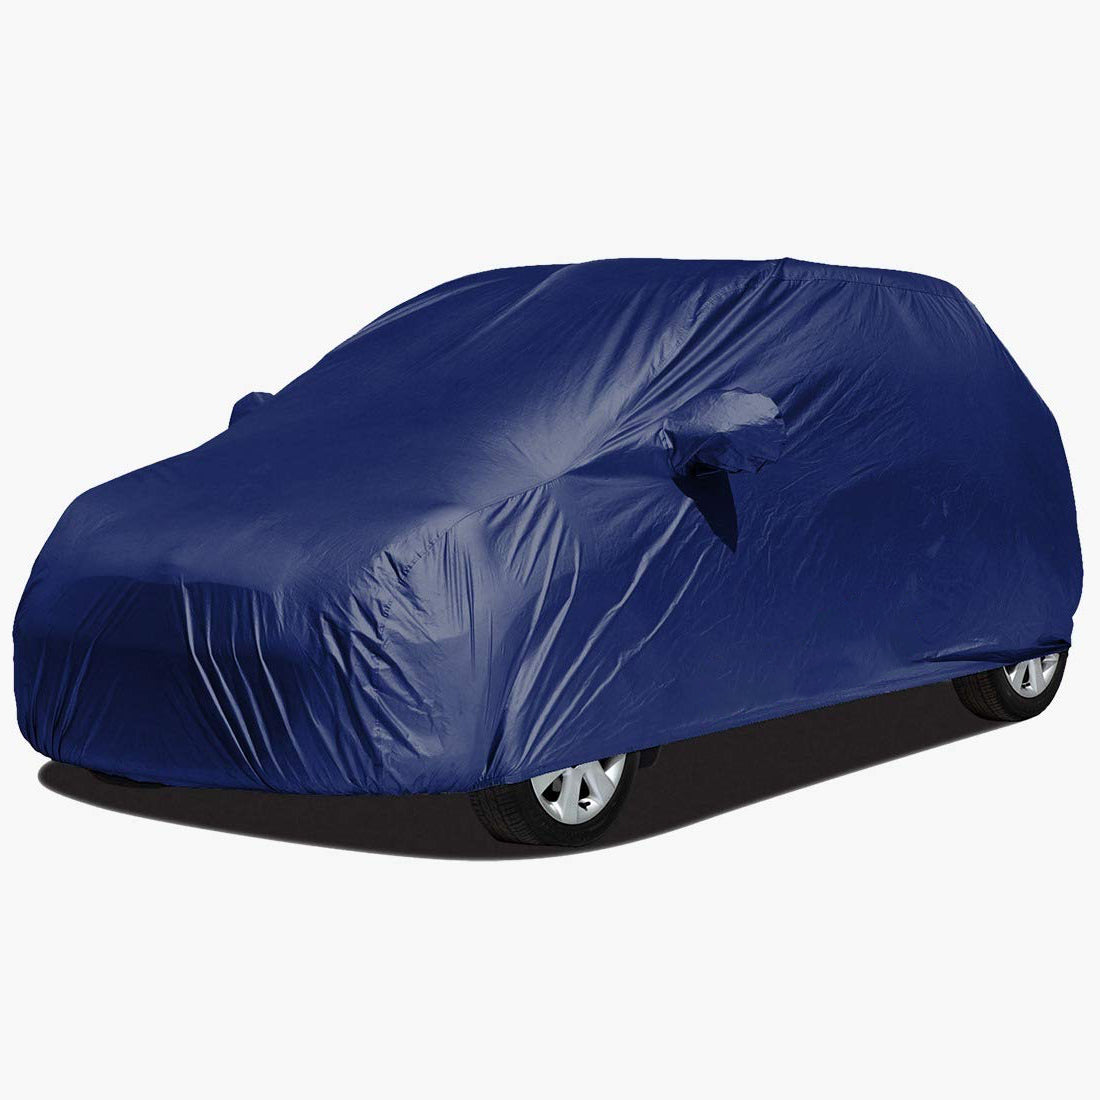 Maruti Wagon R Stingray Car Body Cover, Heat & Water Resistant, Dustproof without side mirror pockets (PREMIUM GREY)